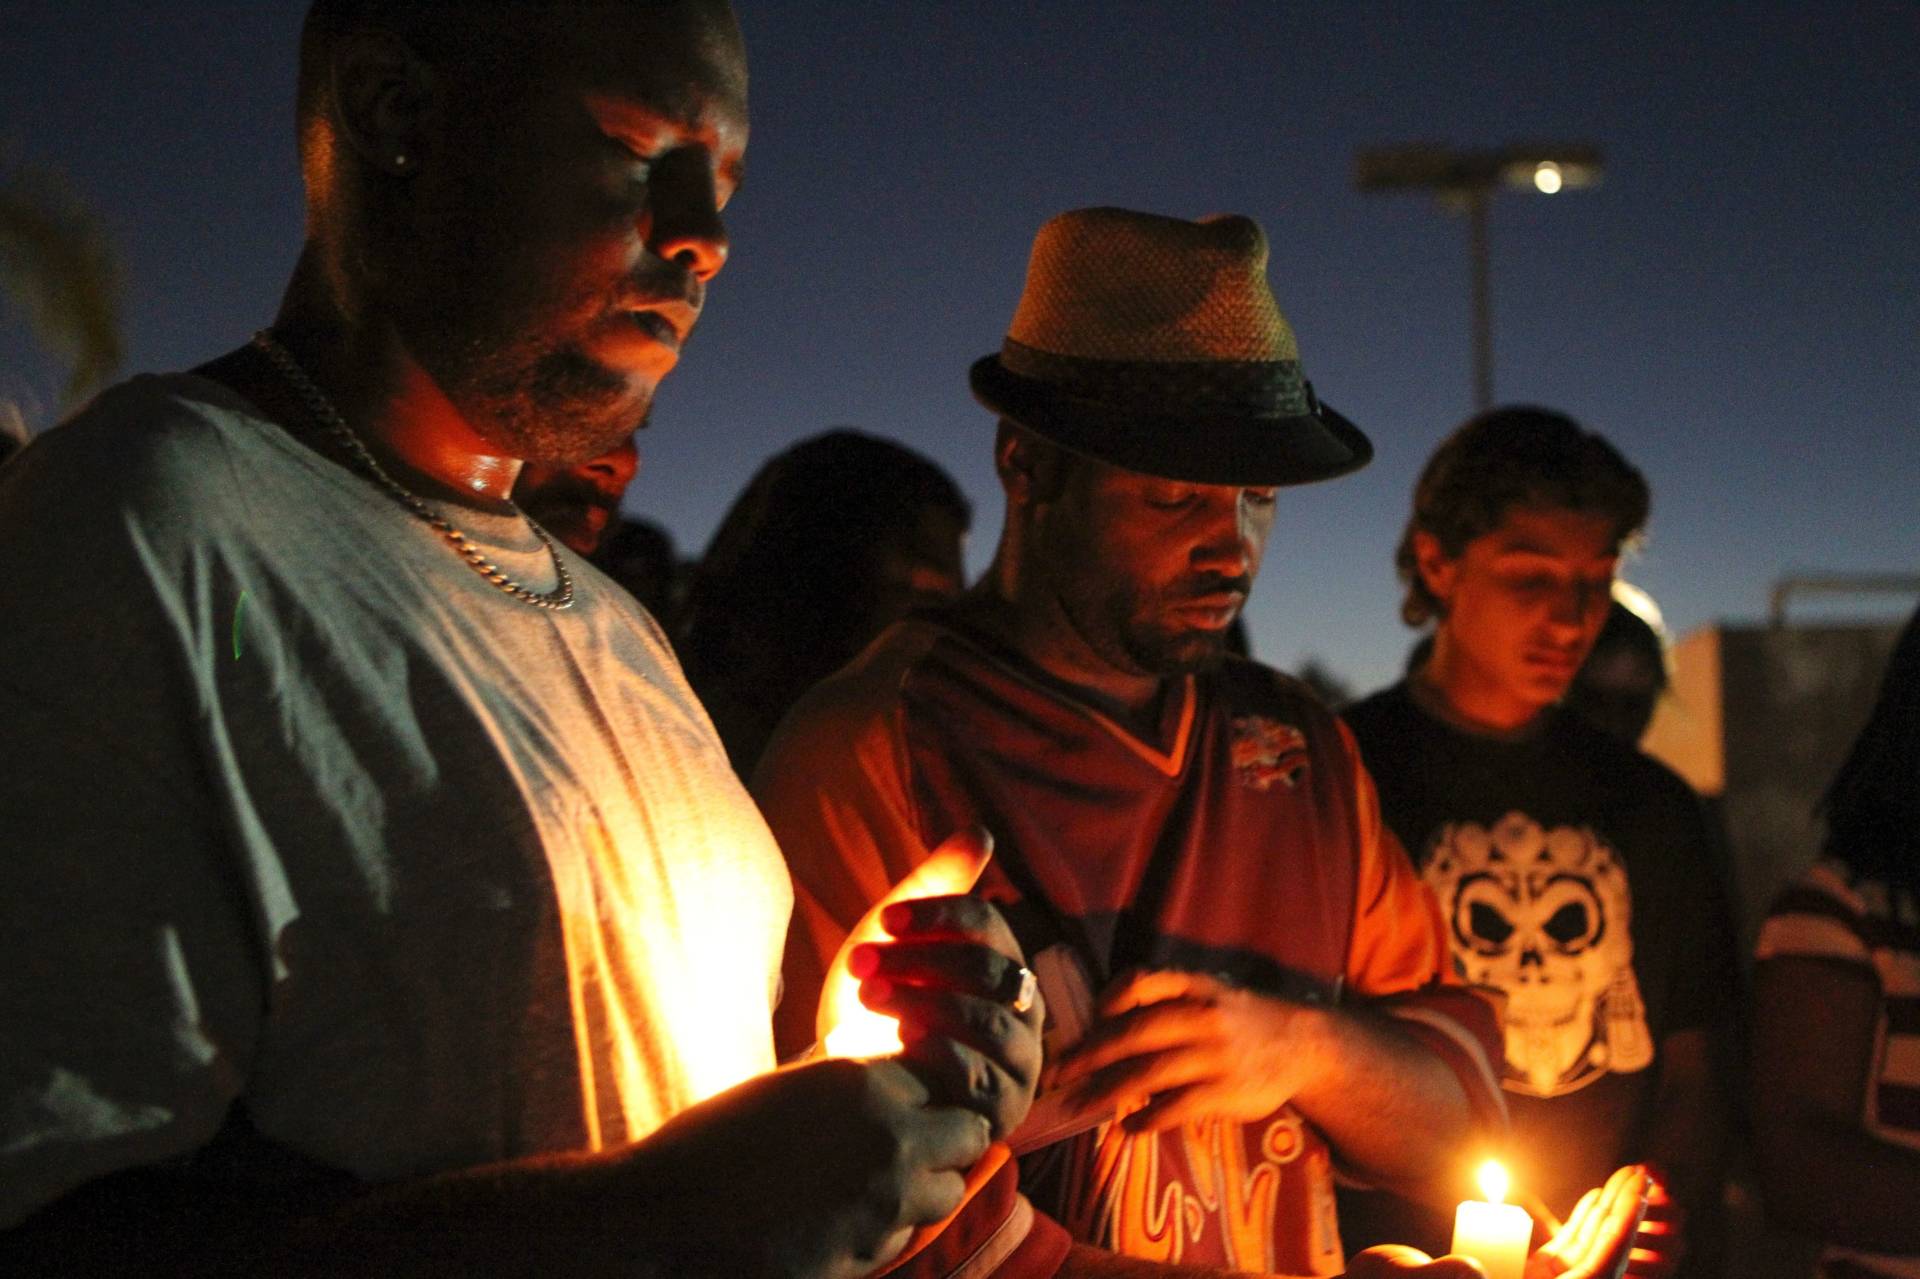 Mourners and activists hold a candlelight vigil during a rally in El Cajon, a suburb of San Diego, Calif., on Wednesday, in protest of the police shooting the day before. Bill Wechter/AFP/Getty Images